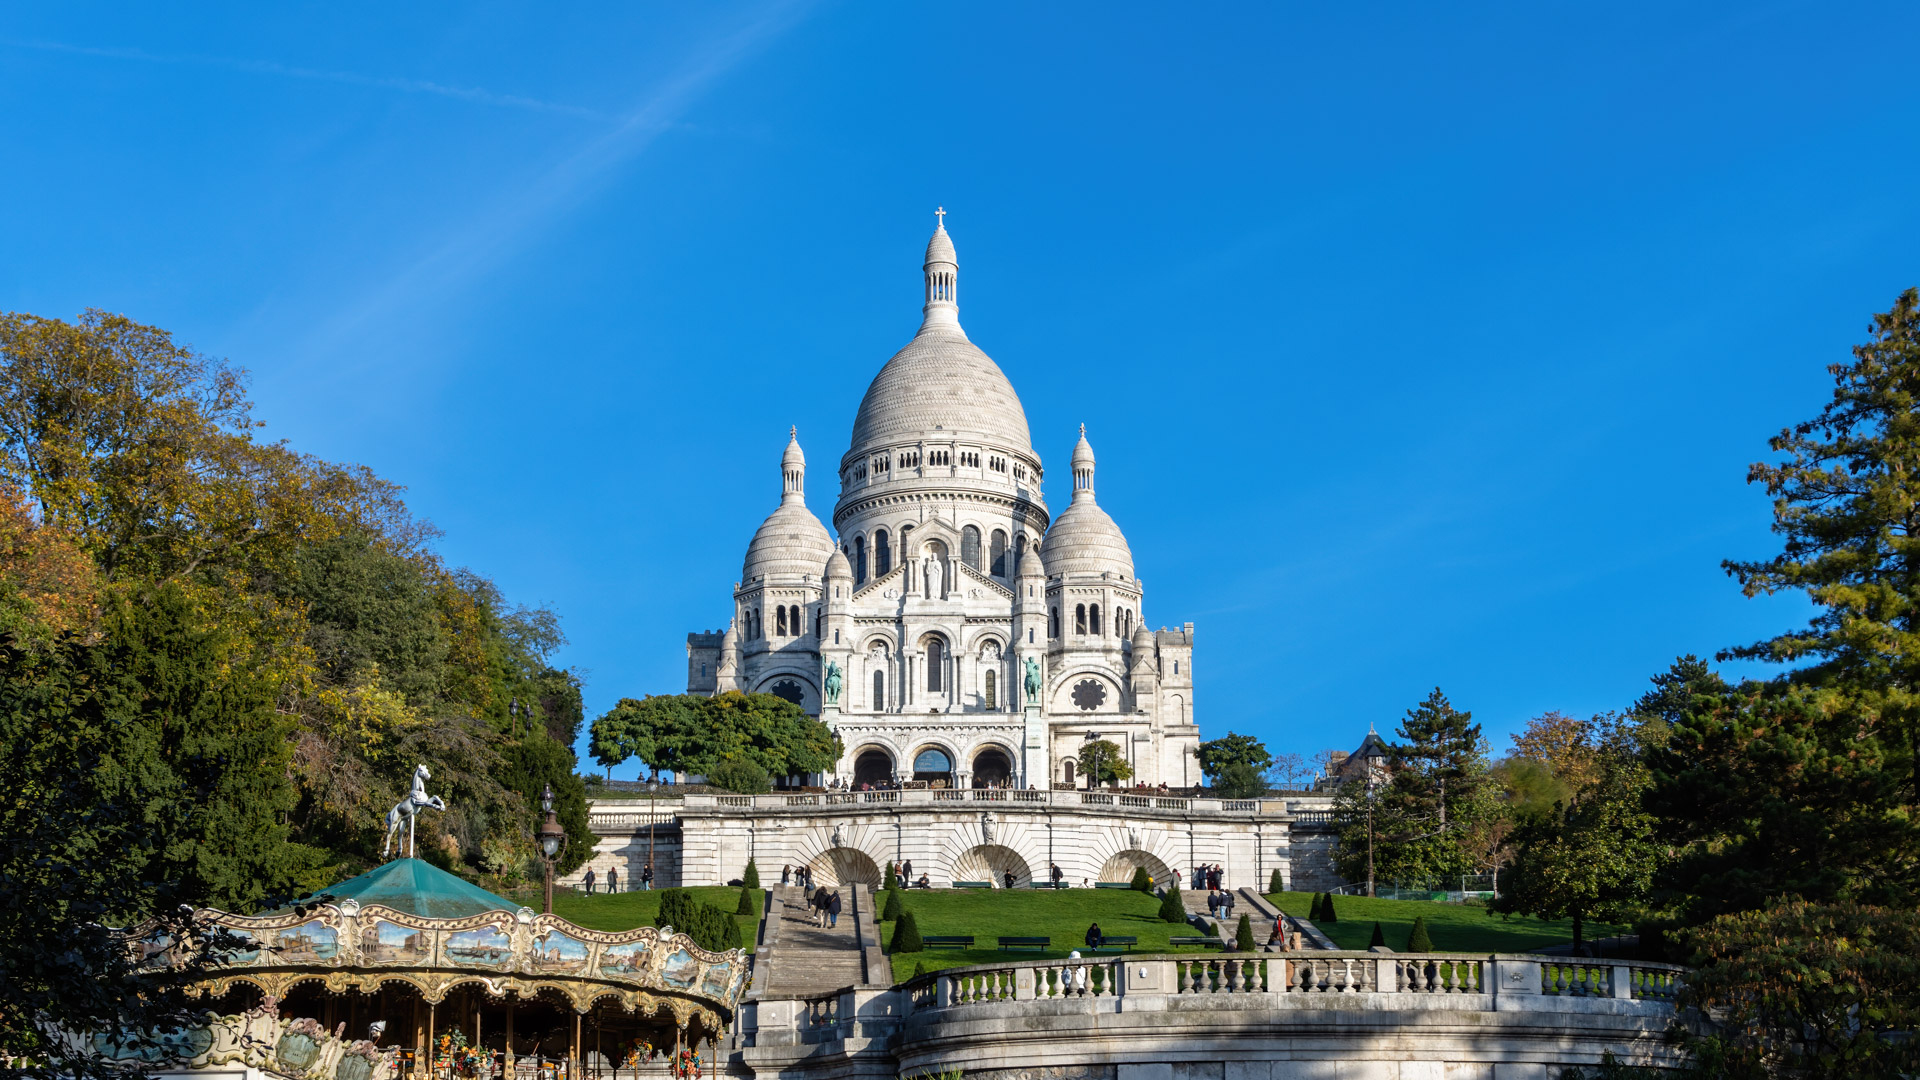 Immerse yourself in the romantic charm of Paris with our wallpaper capturing Sacré-Cœur and Montmartre.